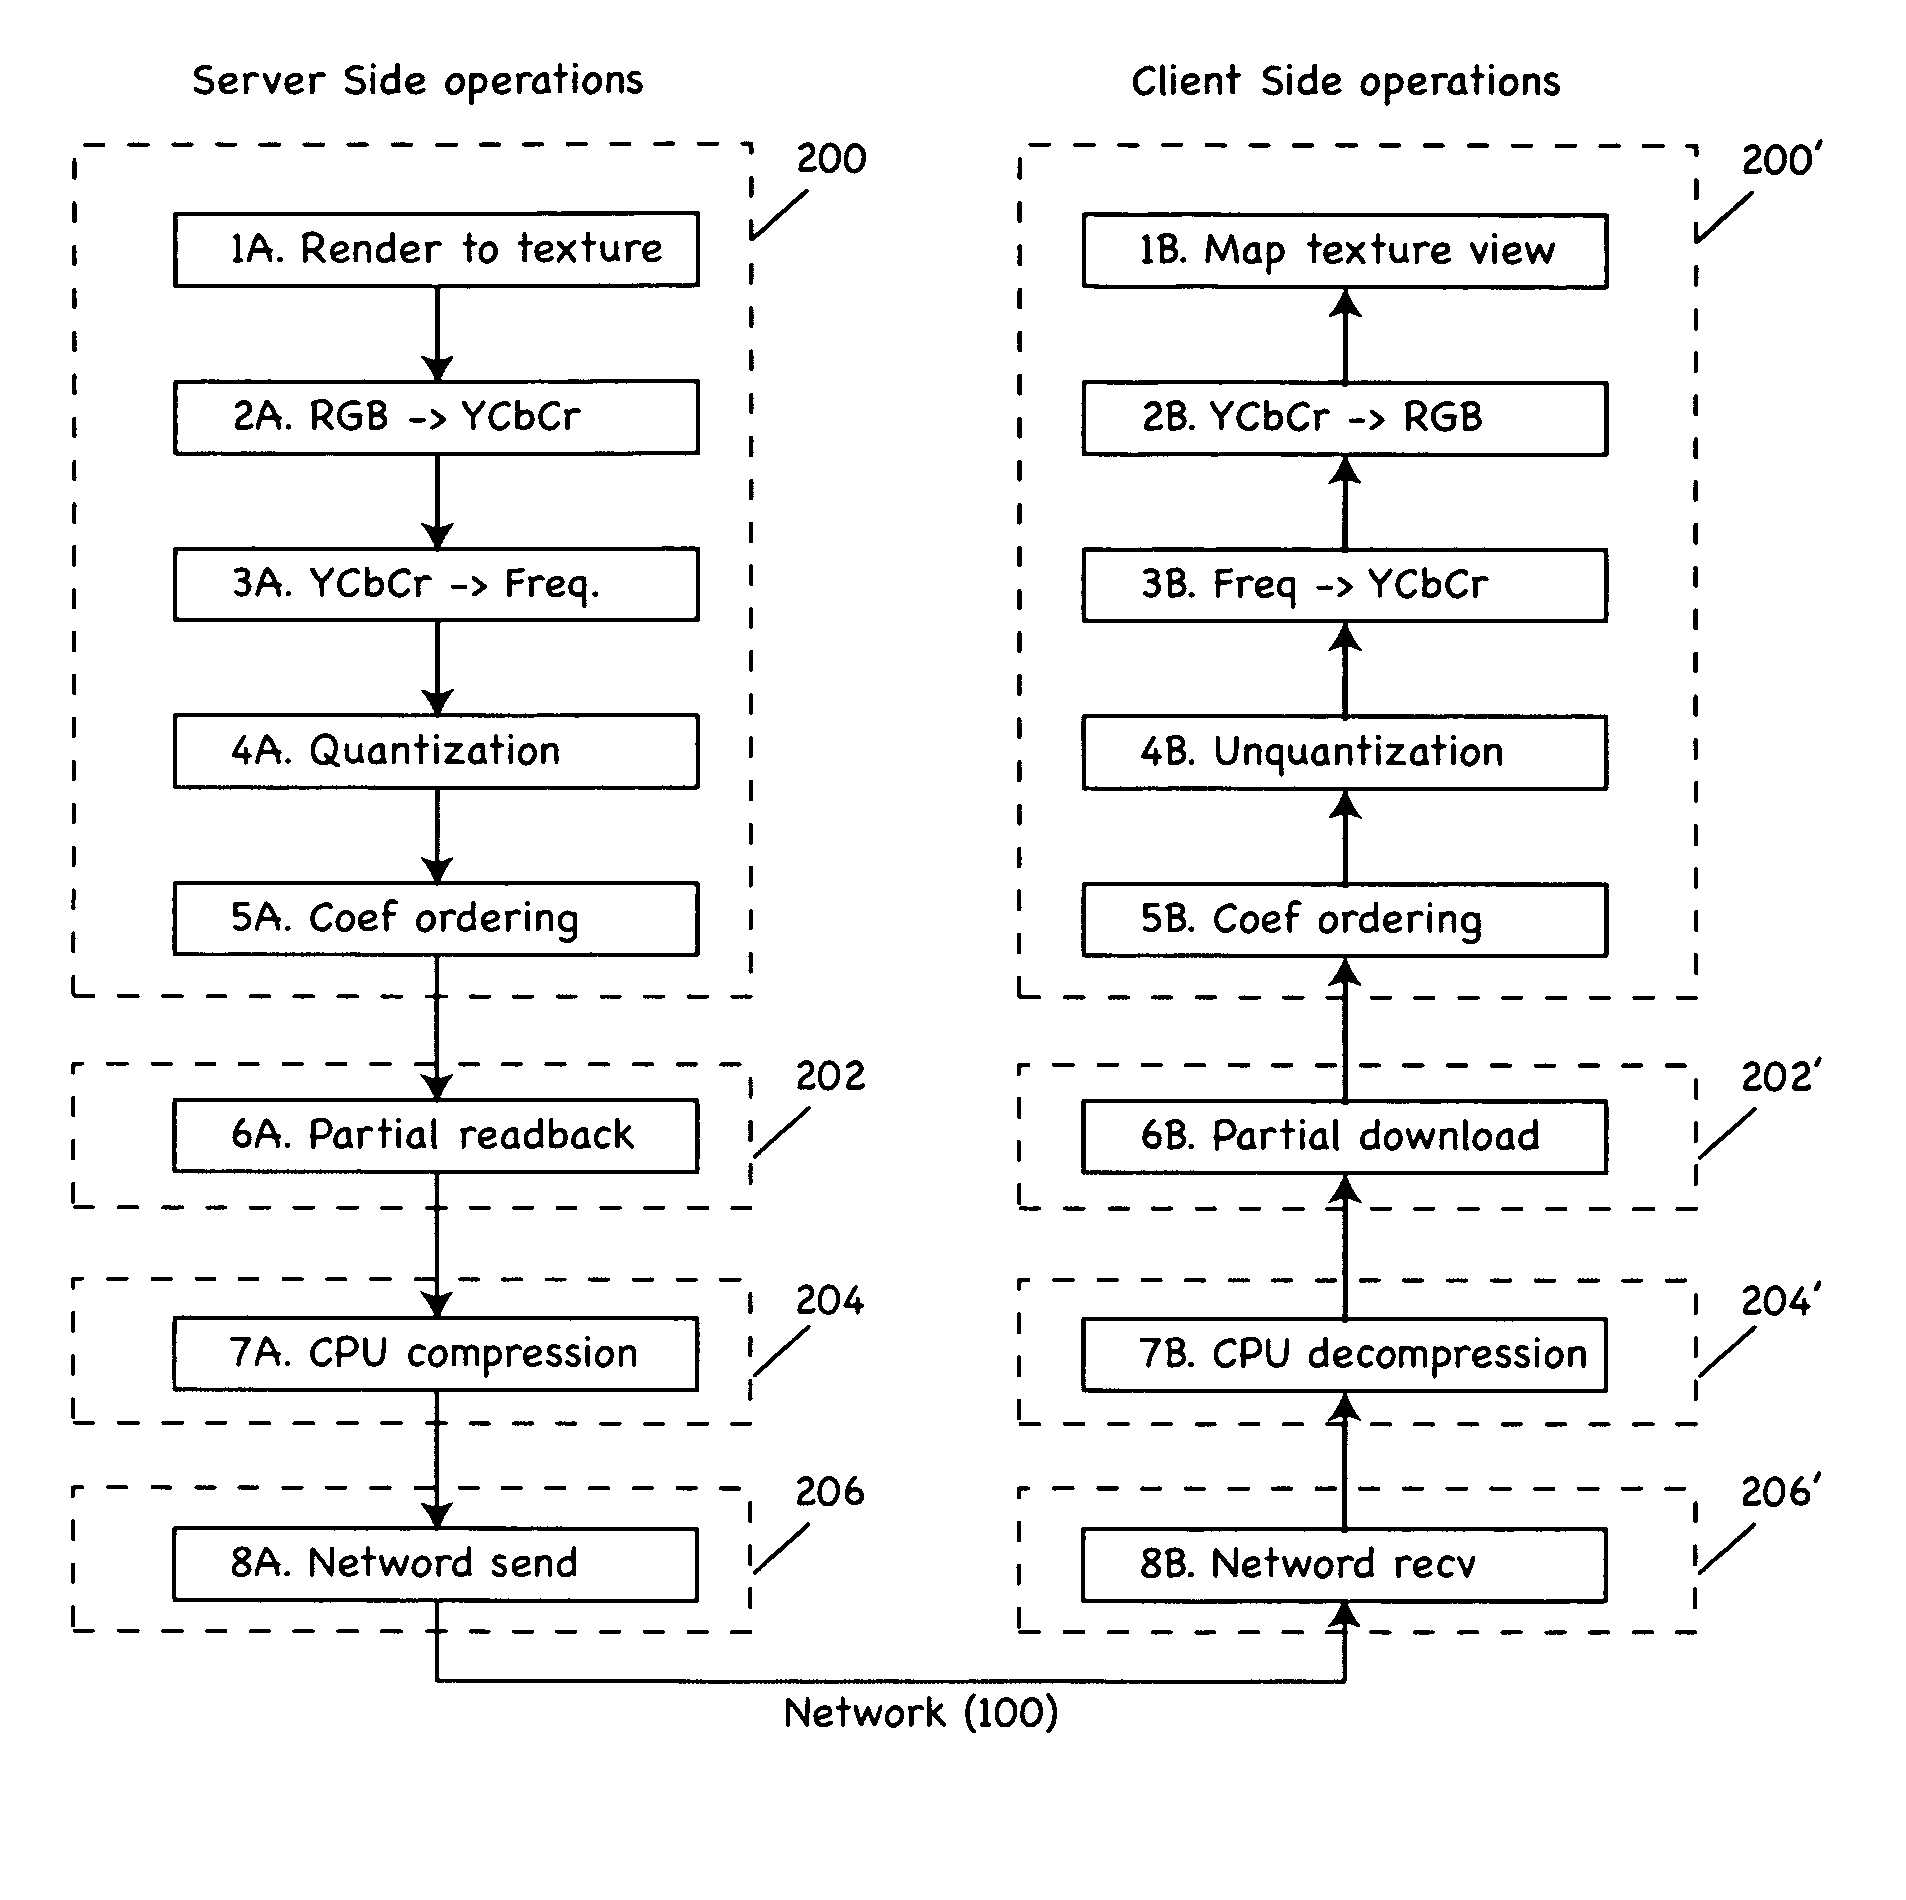 Methods and apparatus for image compression and decompression using graphics processing unit (GPU)